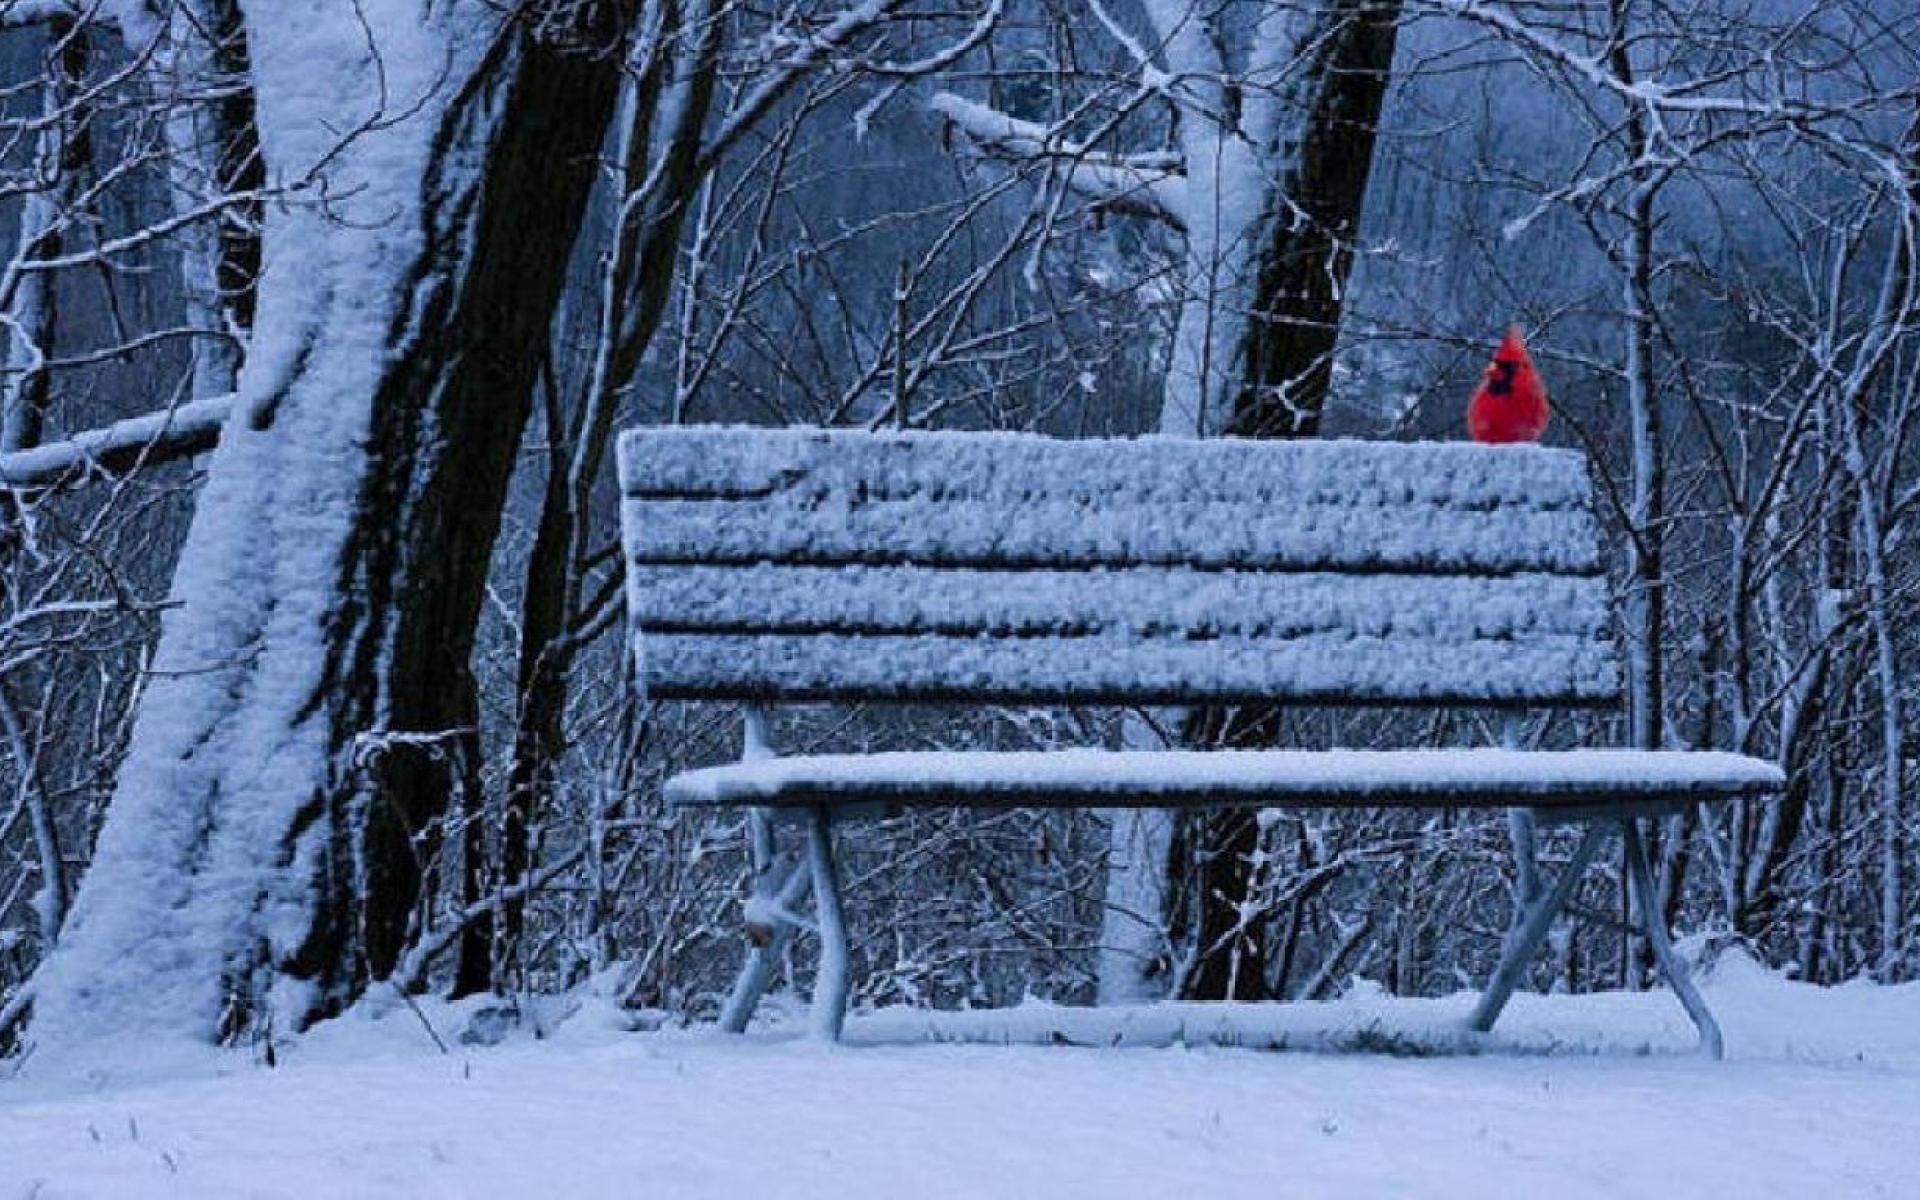 Cardinal on Bench in Winter Park